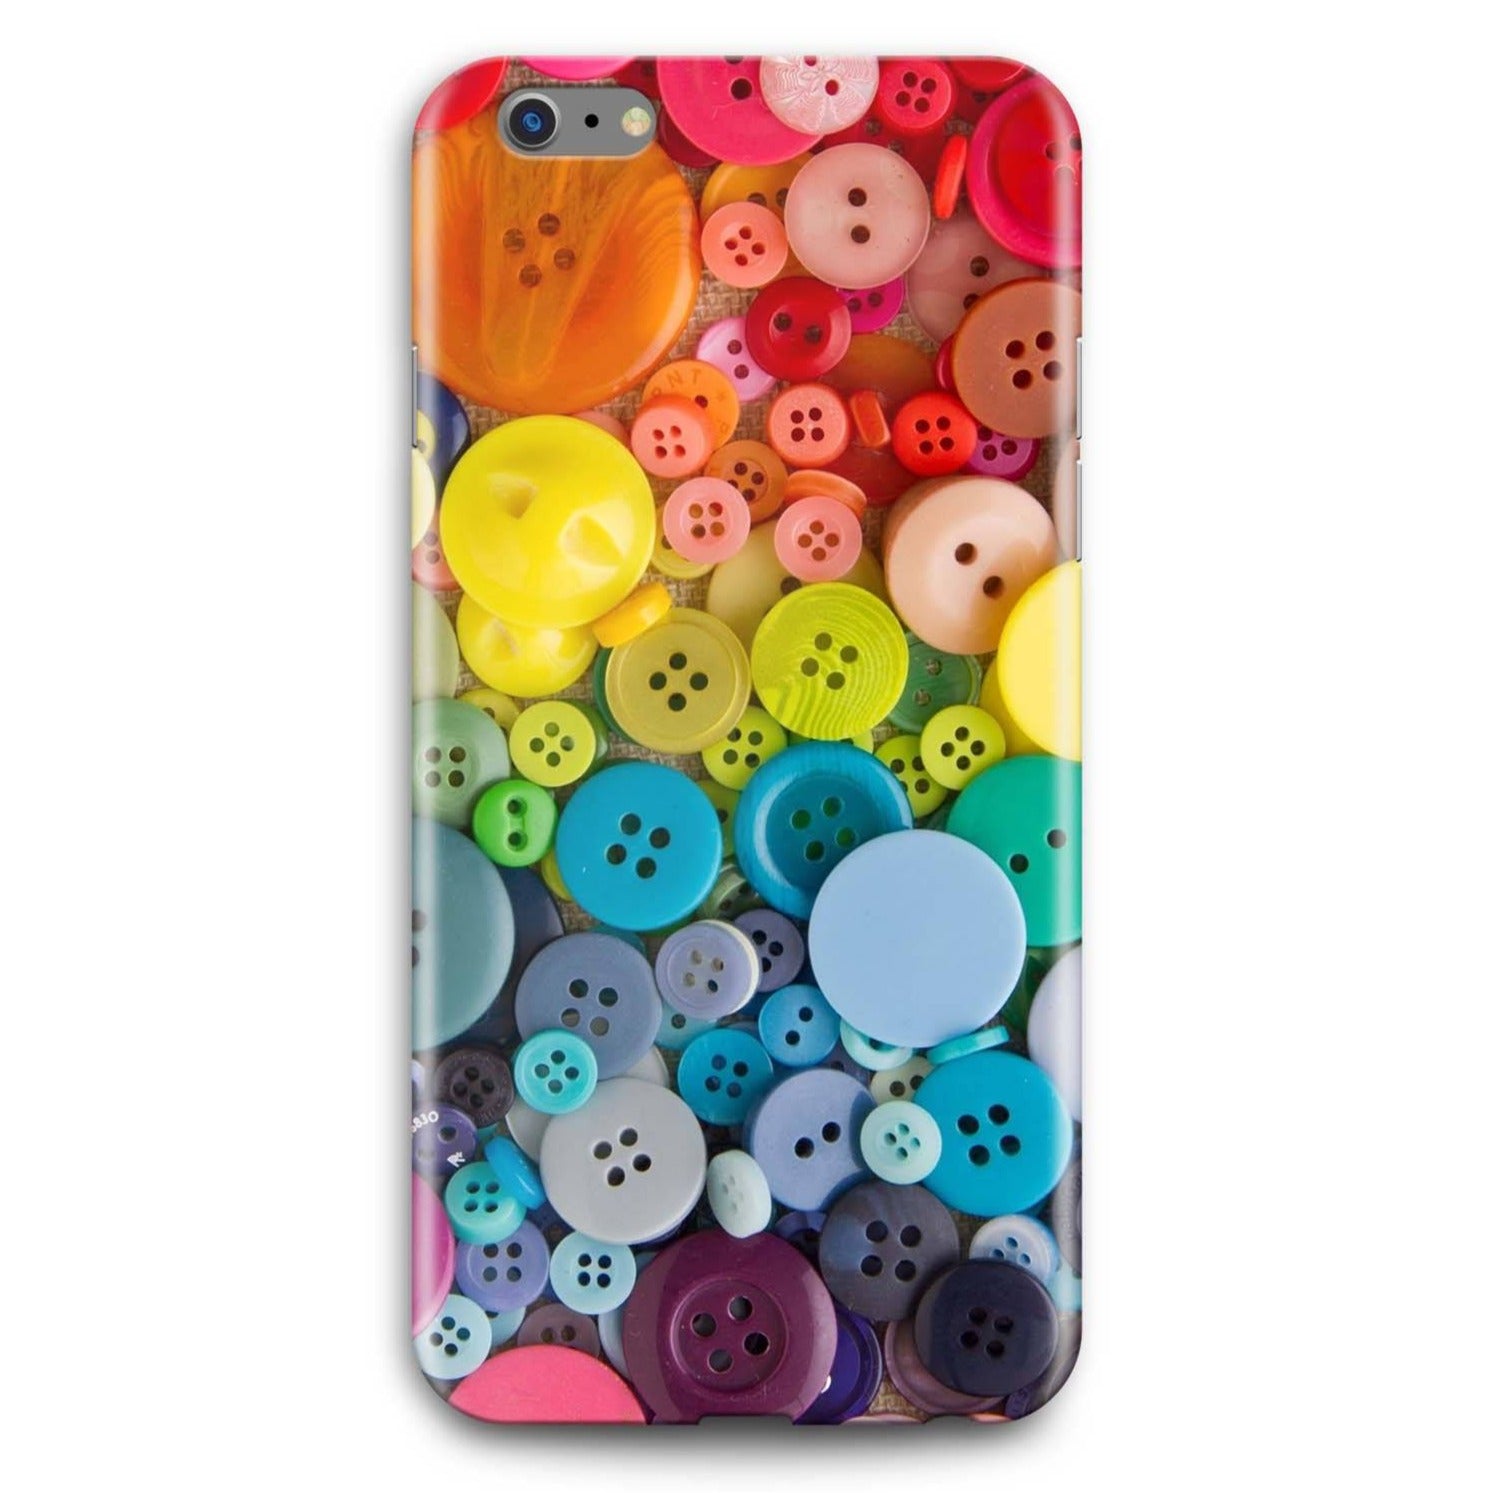 Rainbow Buttons Phone Case - Free shipping USA and Canada